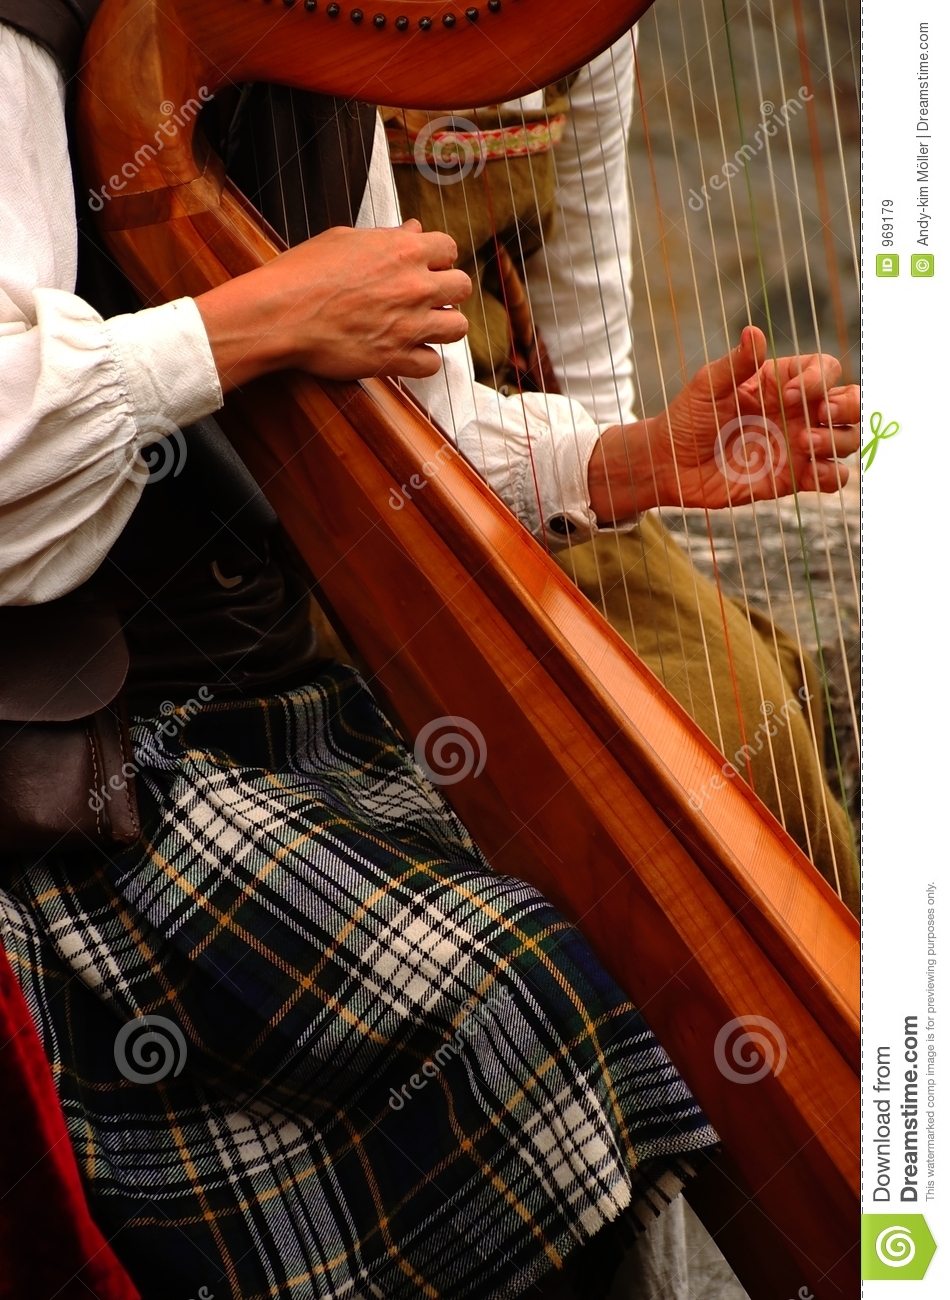 Harp Player Royalty Free Stock Images   Image  969179